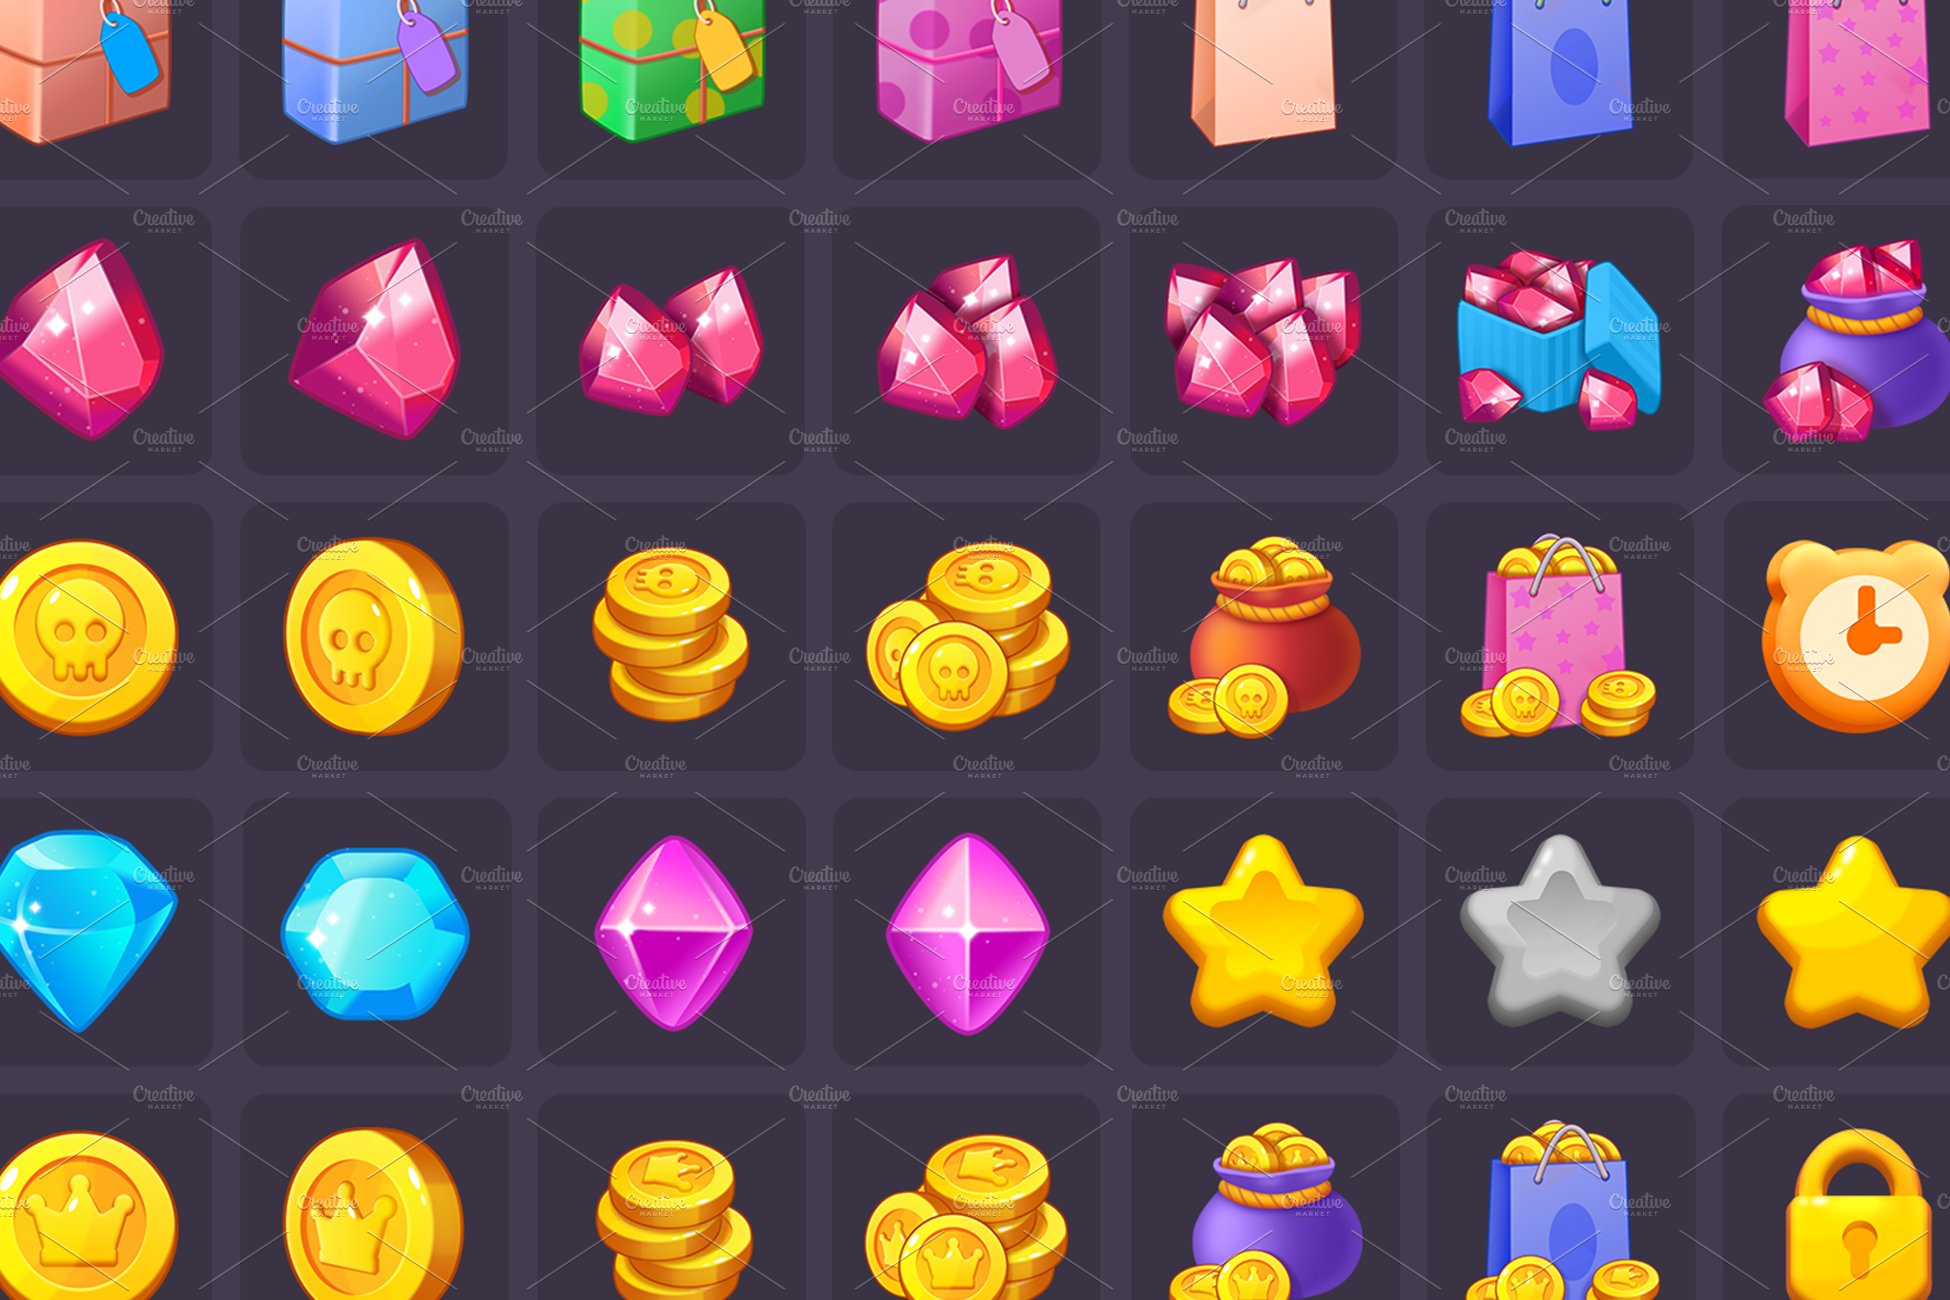 Icons_Coins_Gems_Hearts_Stars cover image.